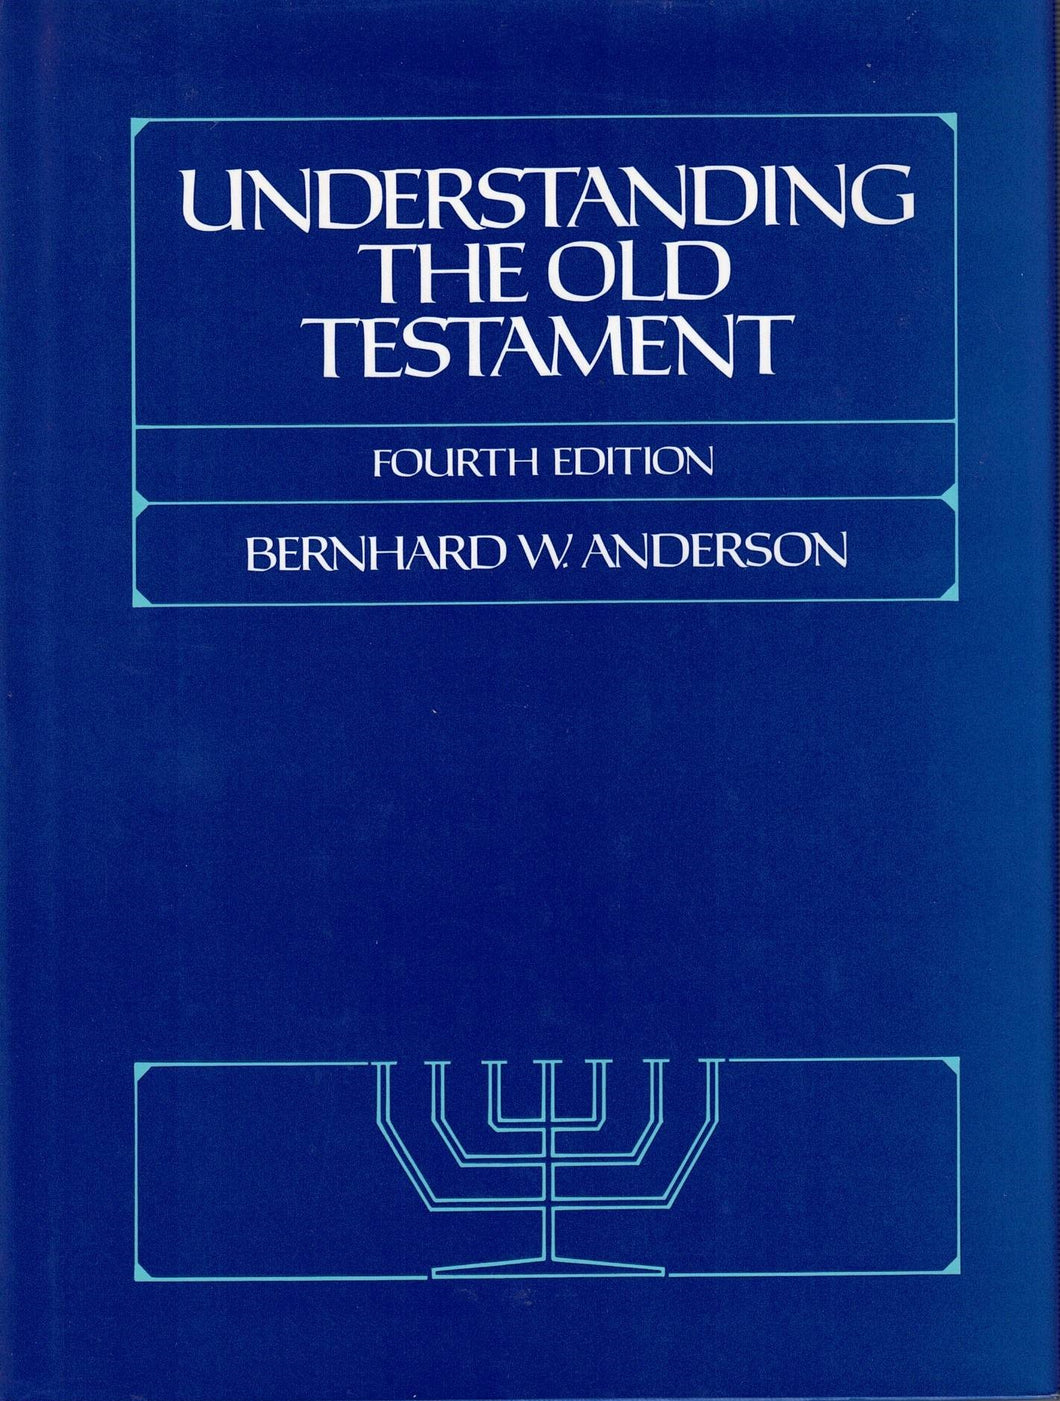 Understanding the Old Testament Fourth Edition